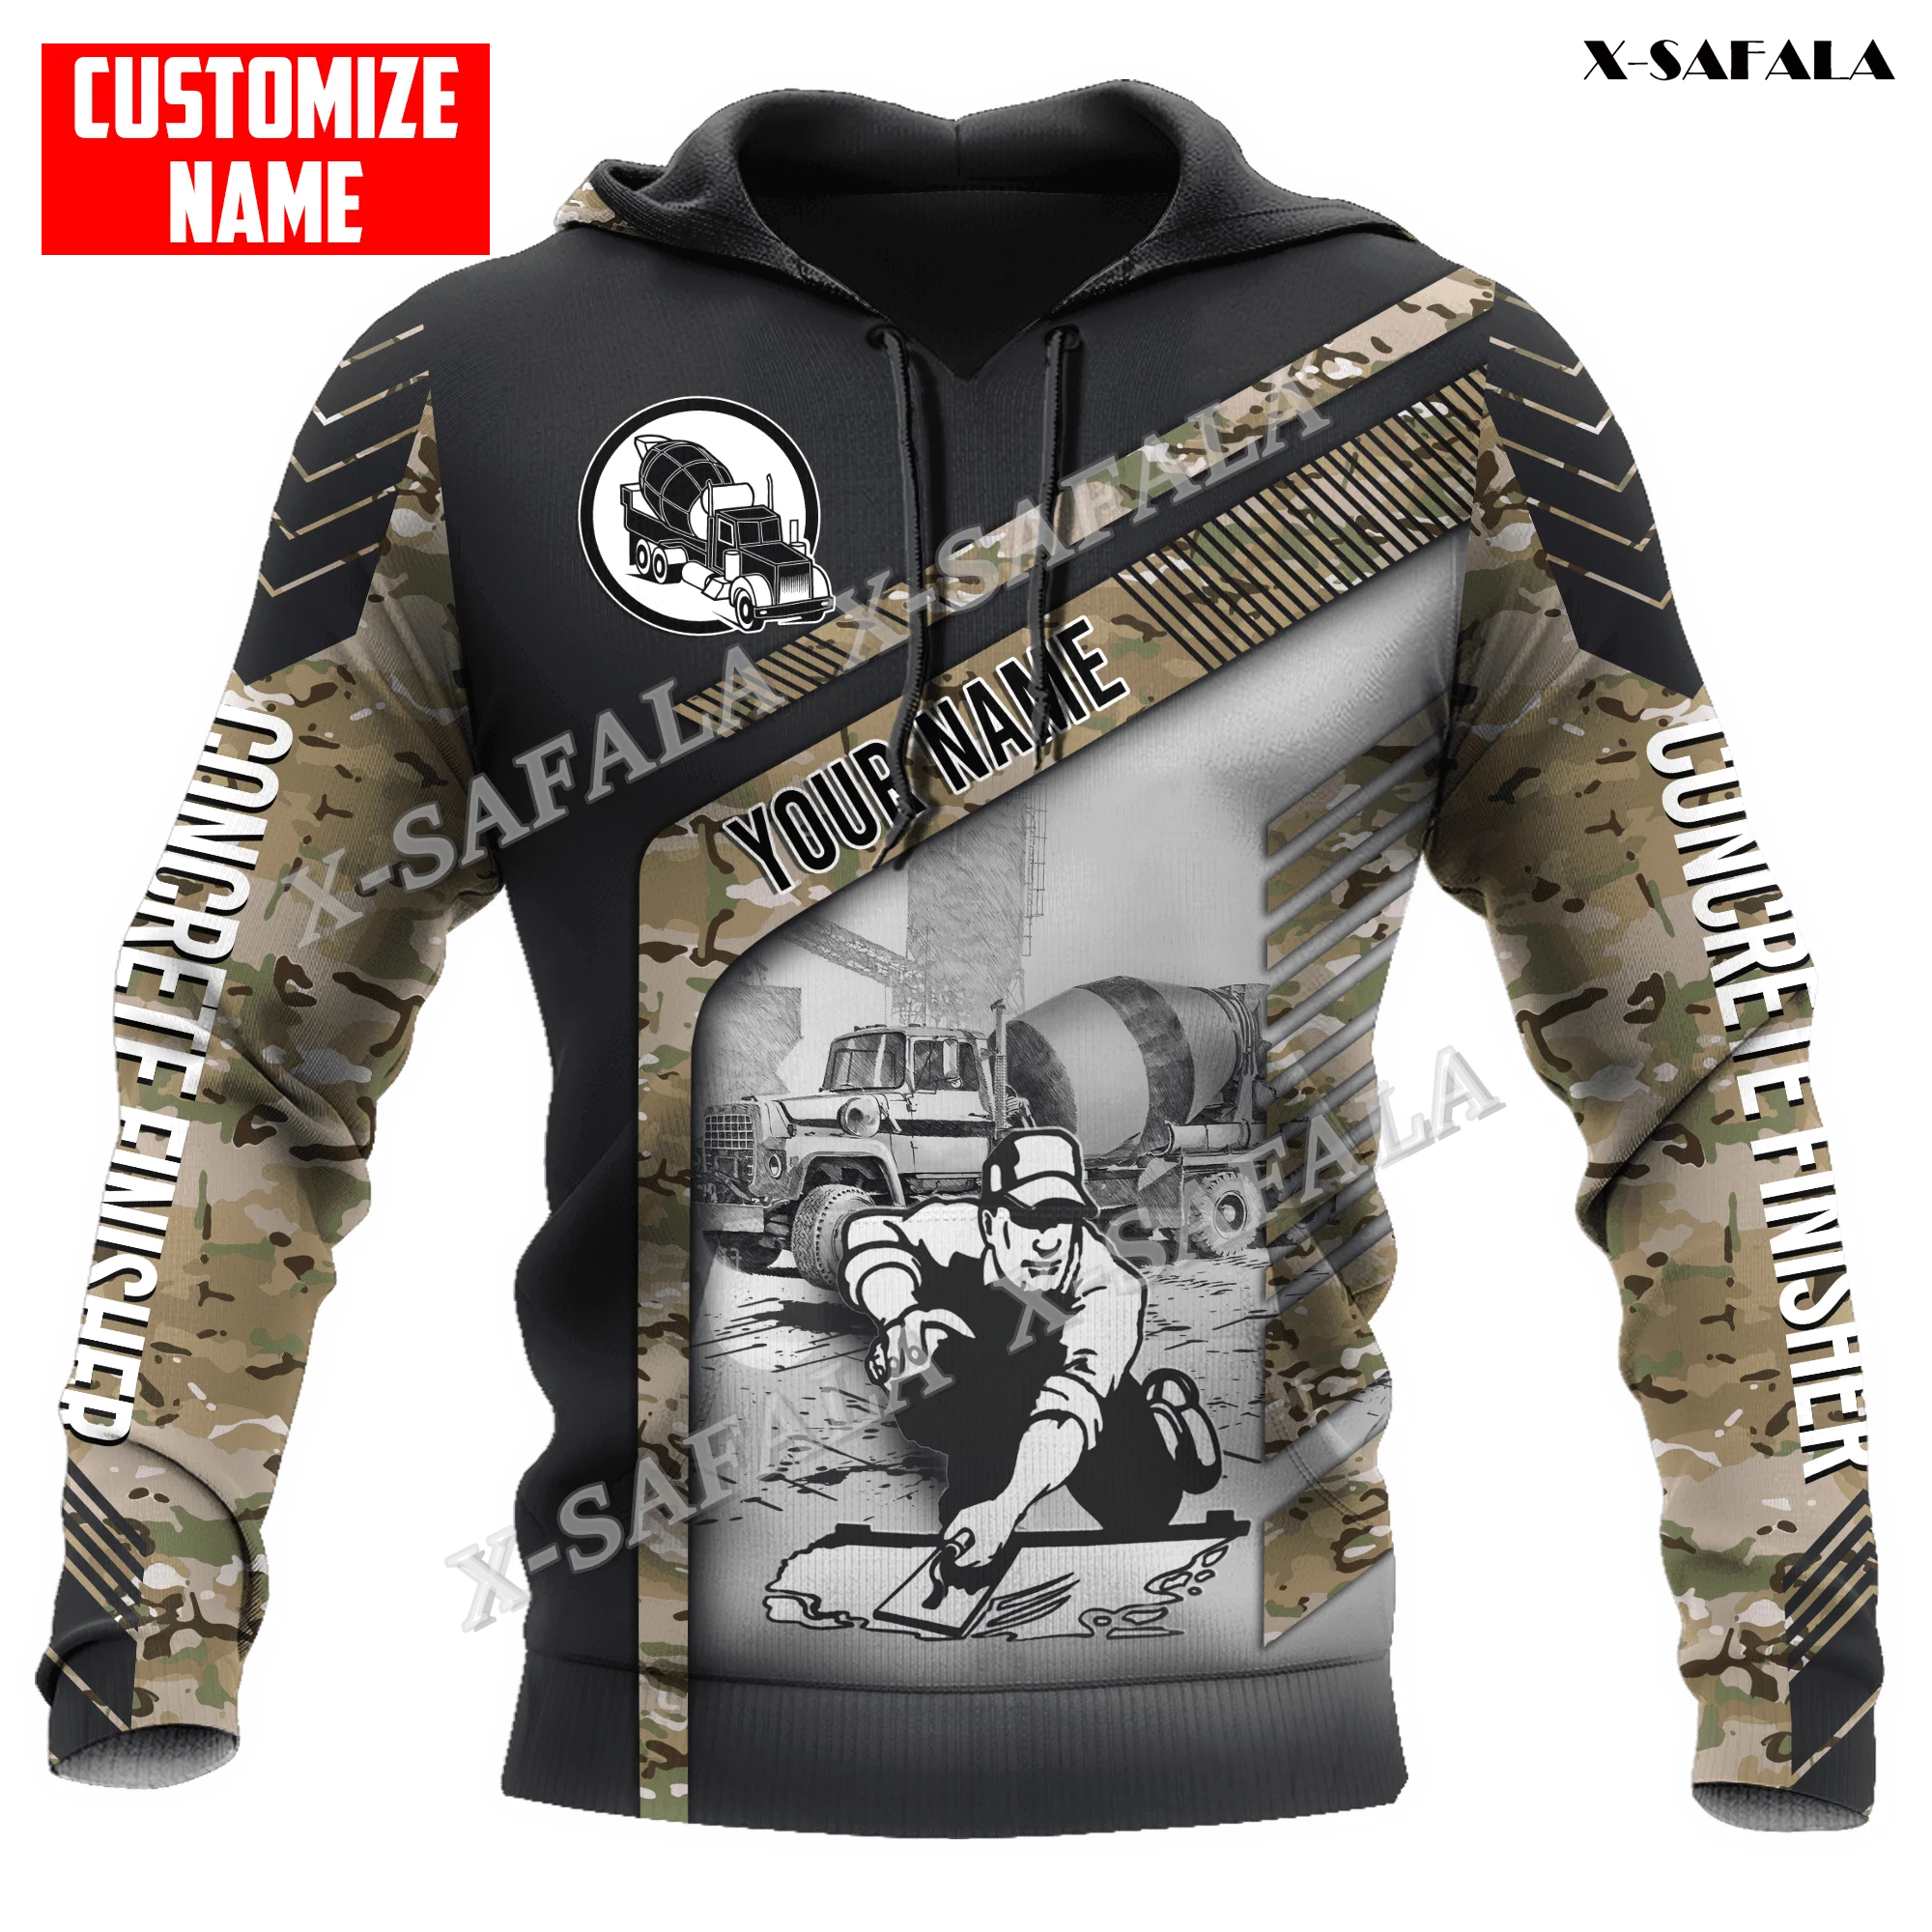 

Concrete Finisher Camouflage Skull Tattoo Gift 3D Print Zipper Hoodie Men Pullover Sweatshirt Hooded Jersey Tracksuits Outwear